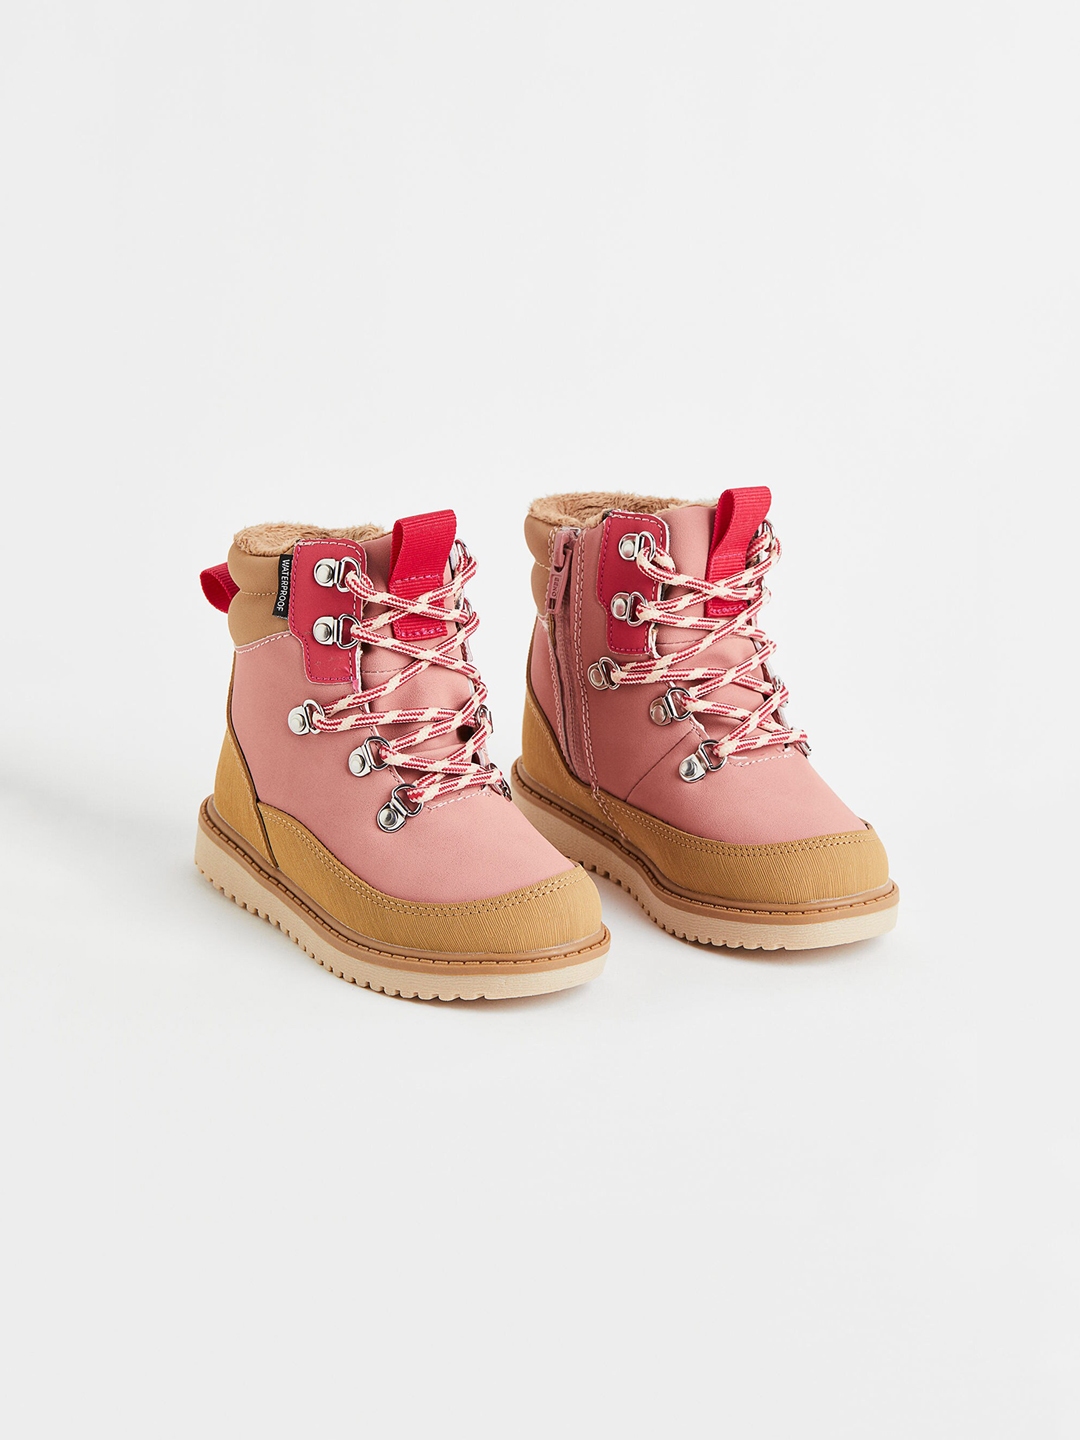 Buy H&M Girls Waterproof Boots - Boots for Girls 25452340 | Myntra